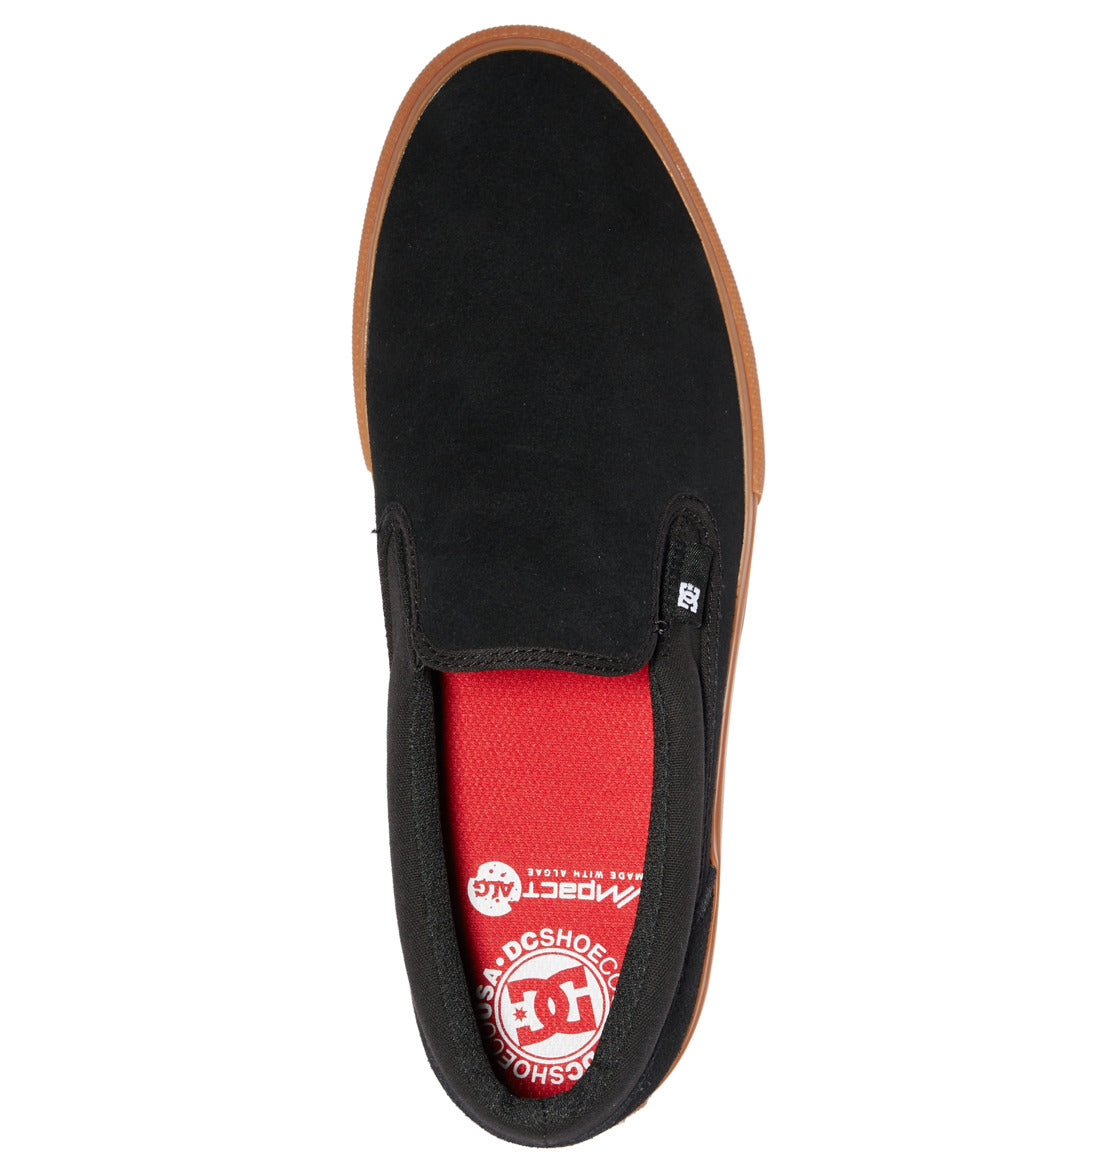 MANUAL SLIP-ON SHOES